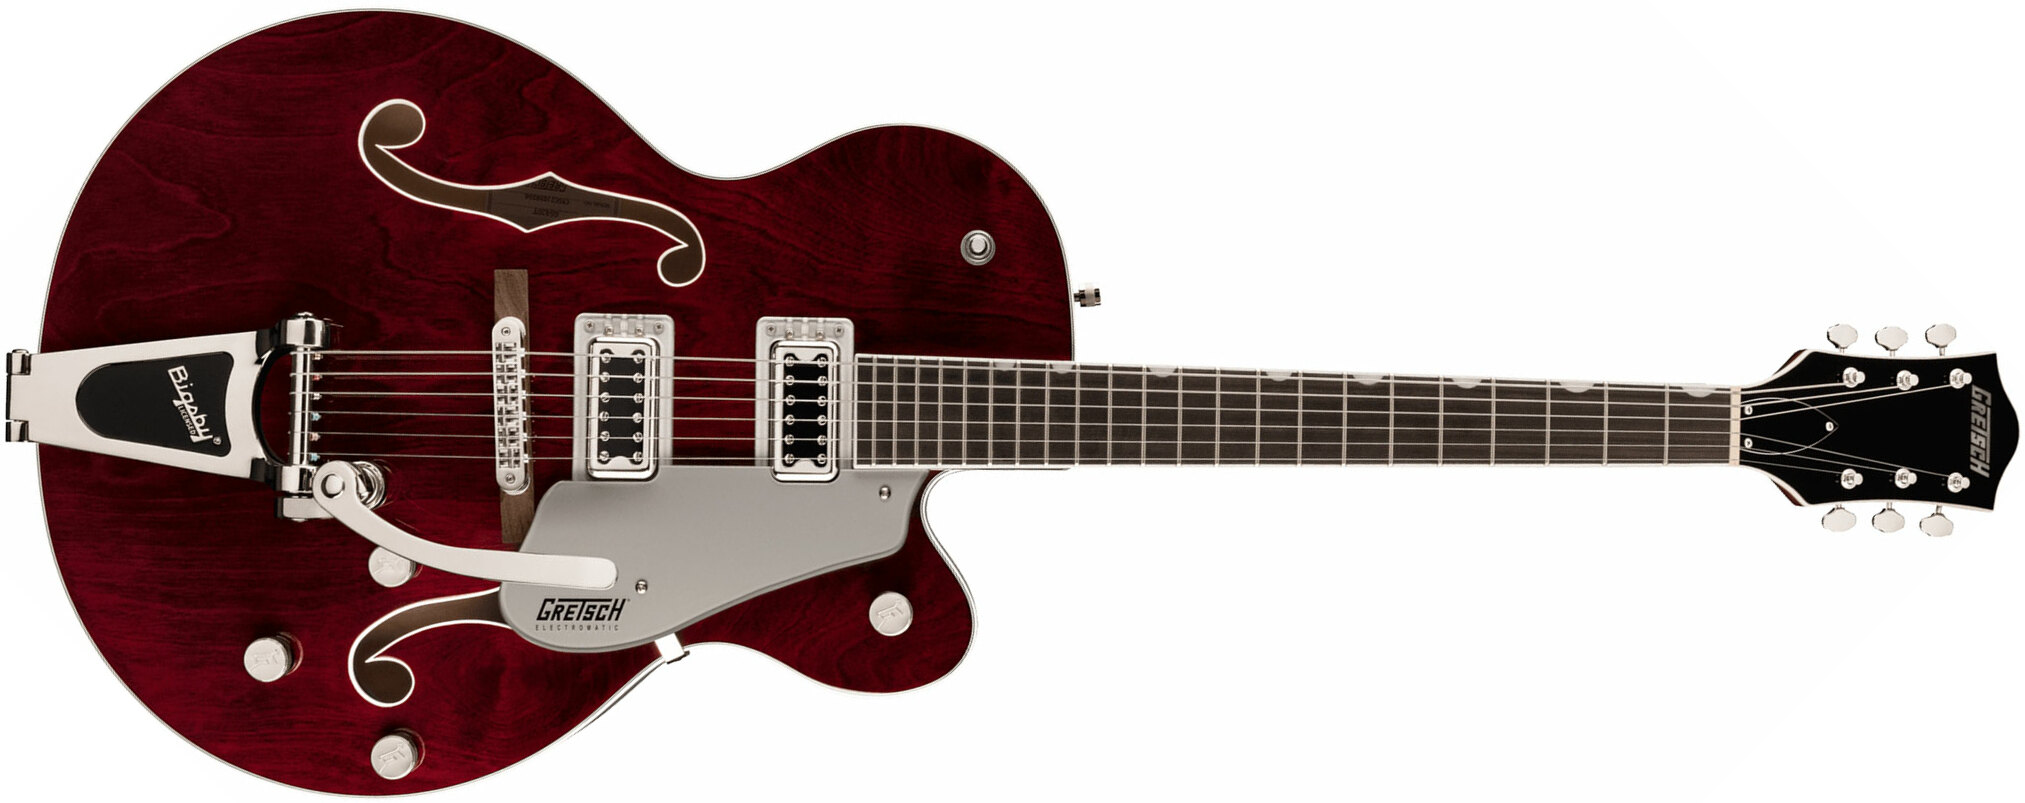 Gretsch G5420t Classic Bigsby Electromatic Hollow Body 2h Trem Lau - Walnut Stain - Semi-hollow electric guitar - Main picture